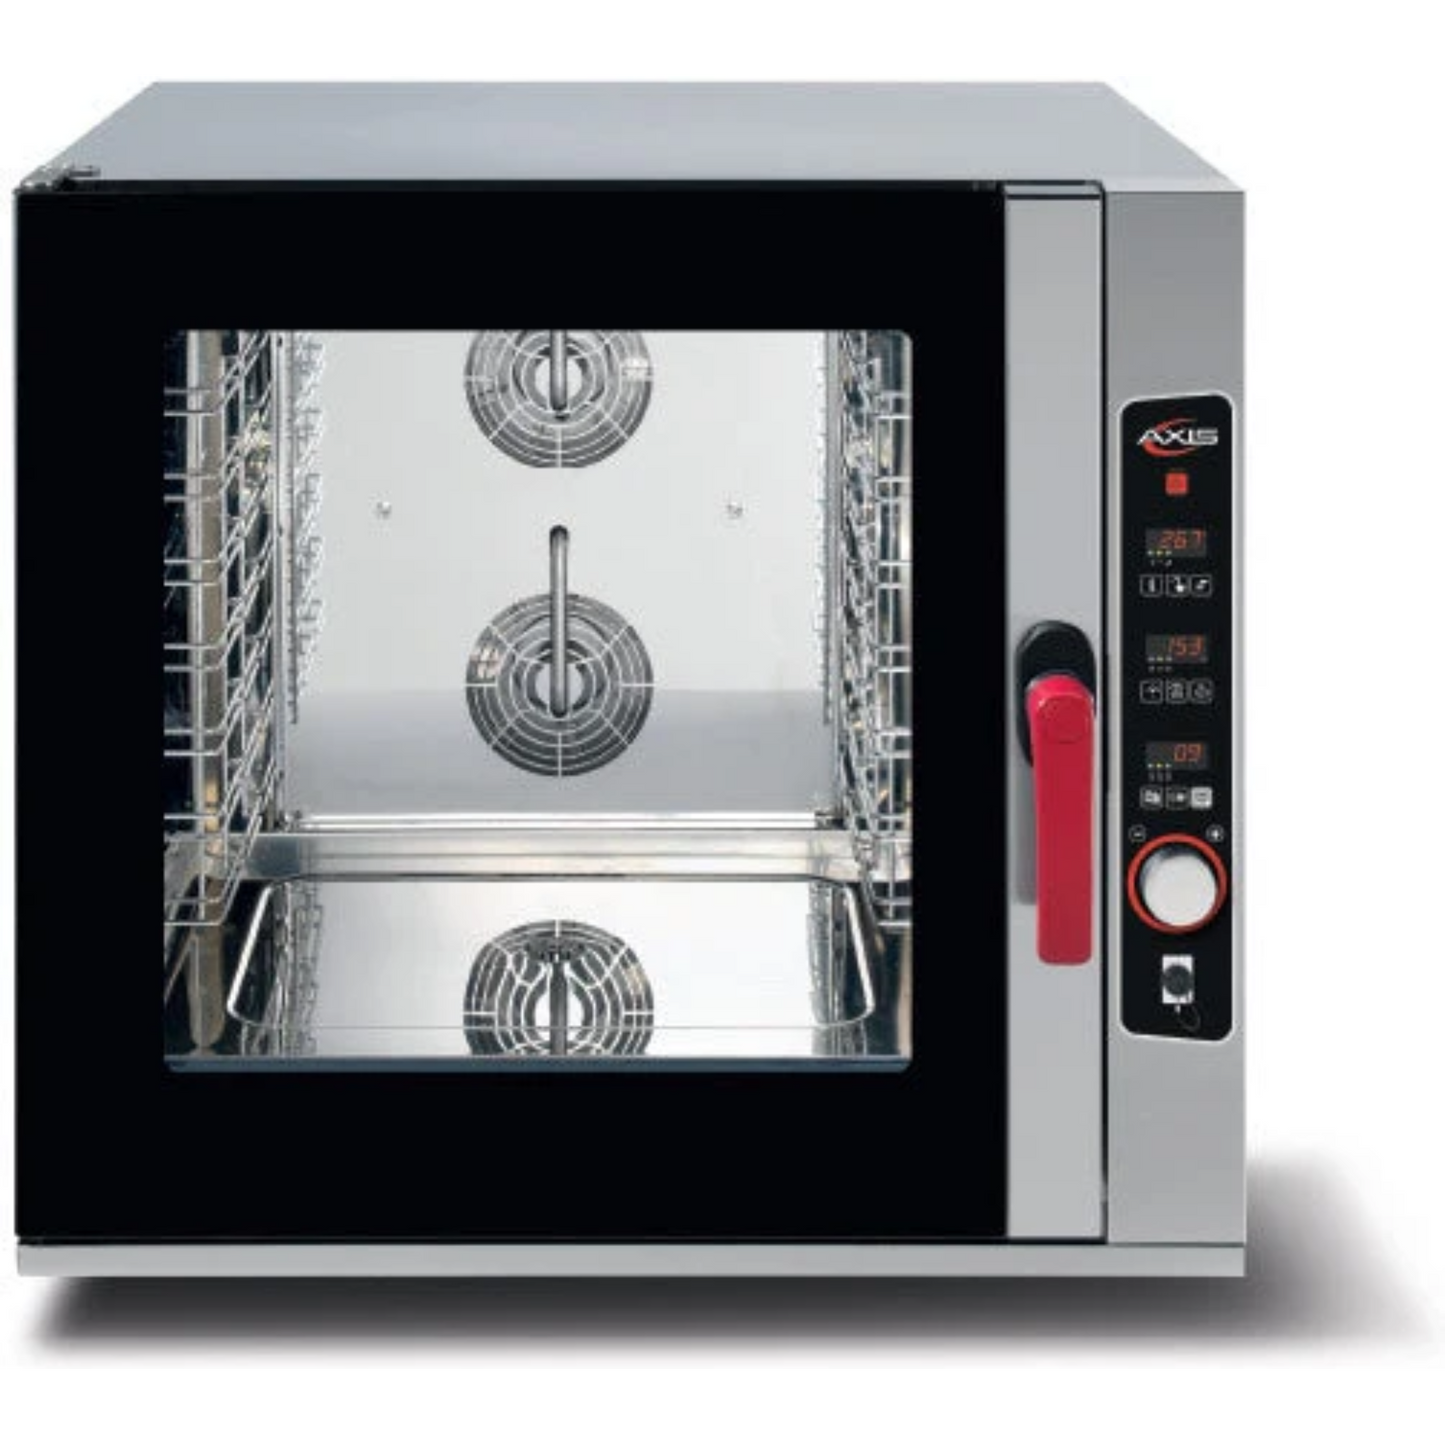 Axis AX-CL06D Electric Combi Oven with Digital Controls 6 Pan Capacity Full-Size